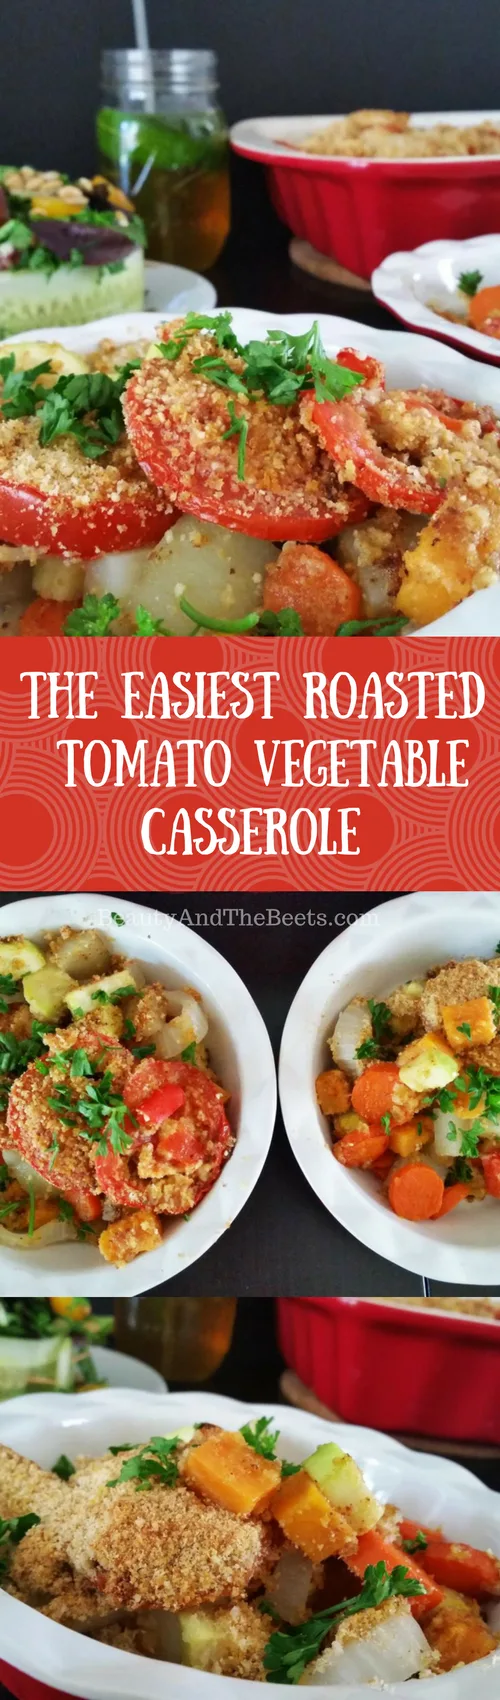 beauty-and-the-beets-roasted-tomato-vegetable-casserole-1